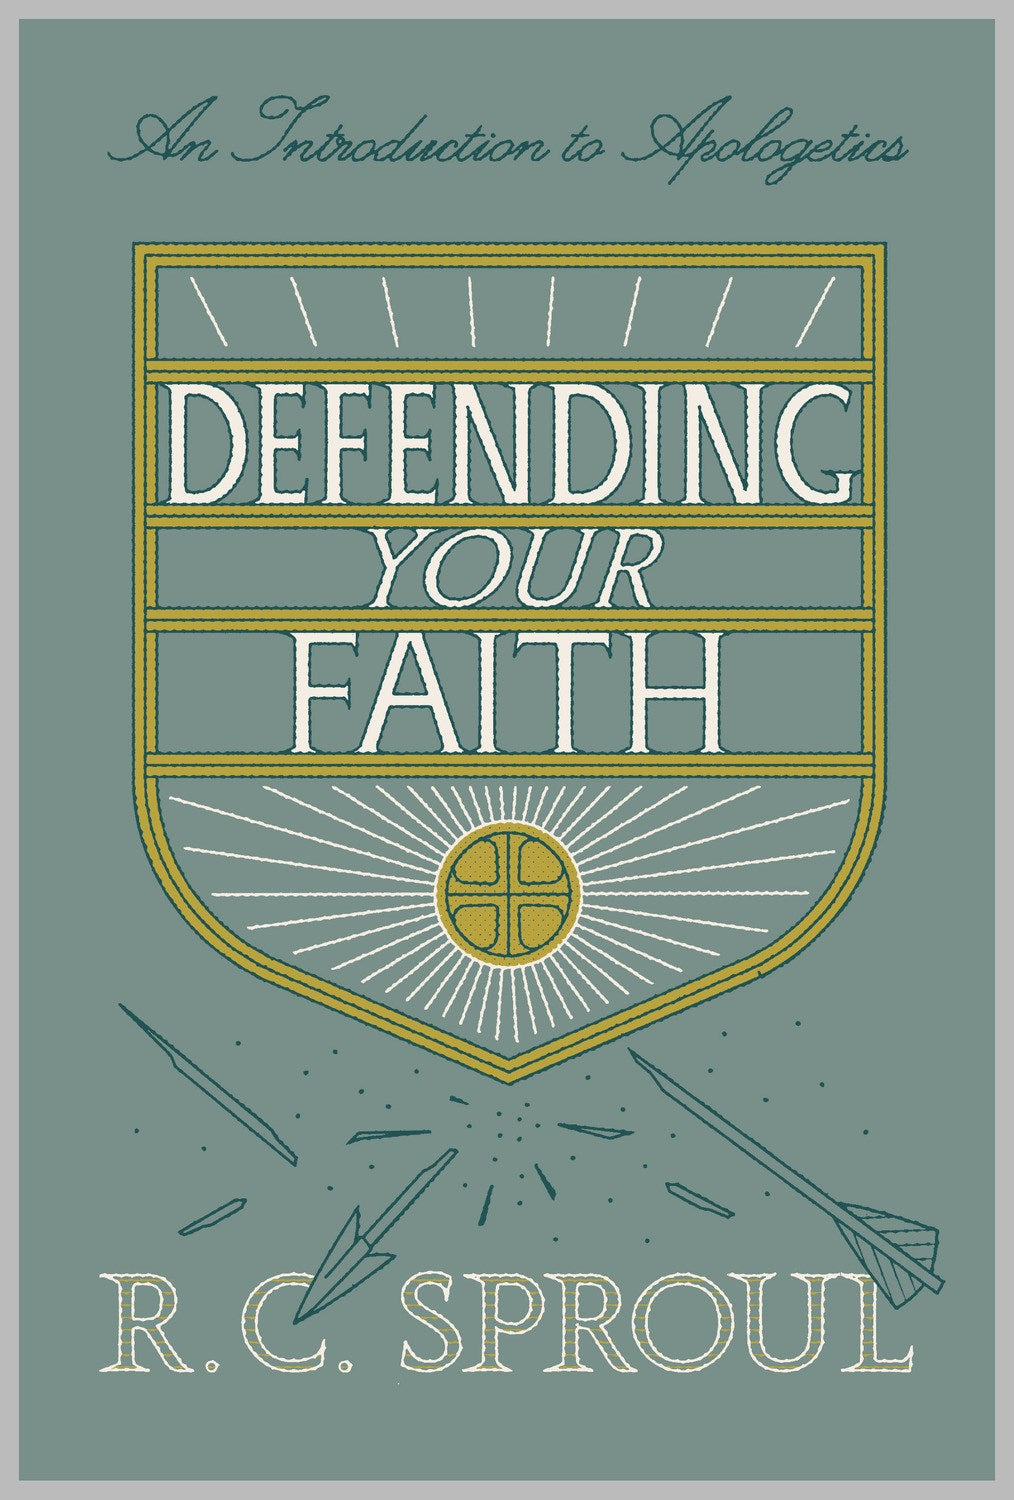 Defending Your Faith (Redesign)